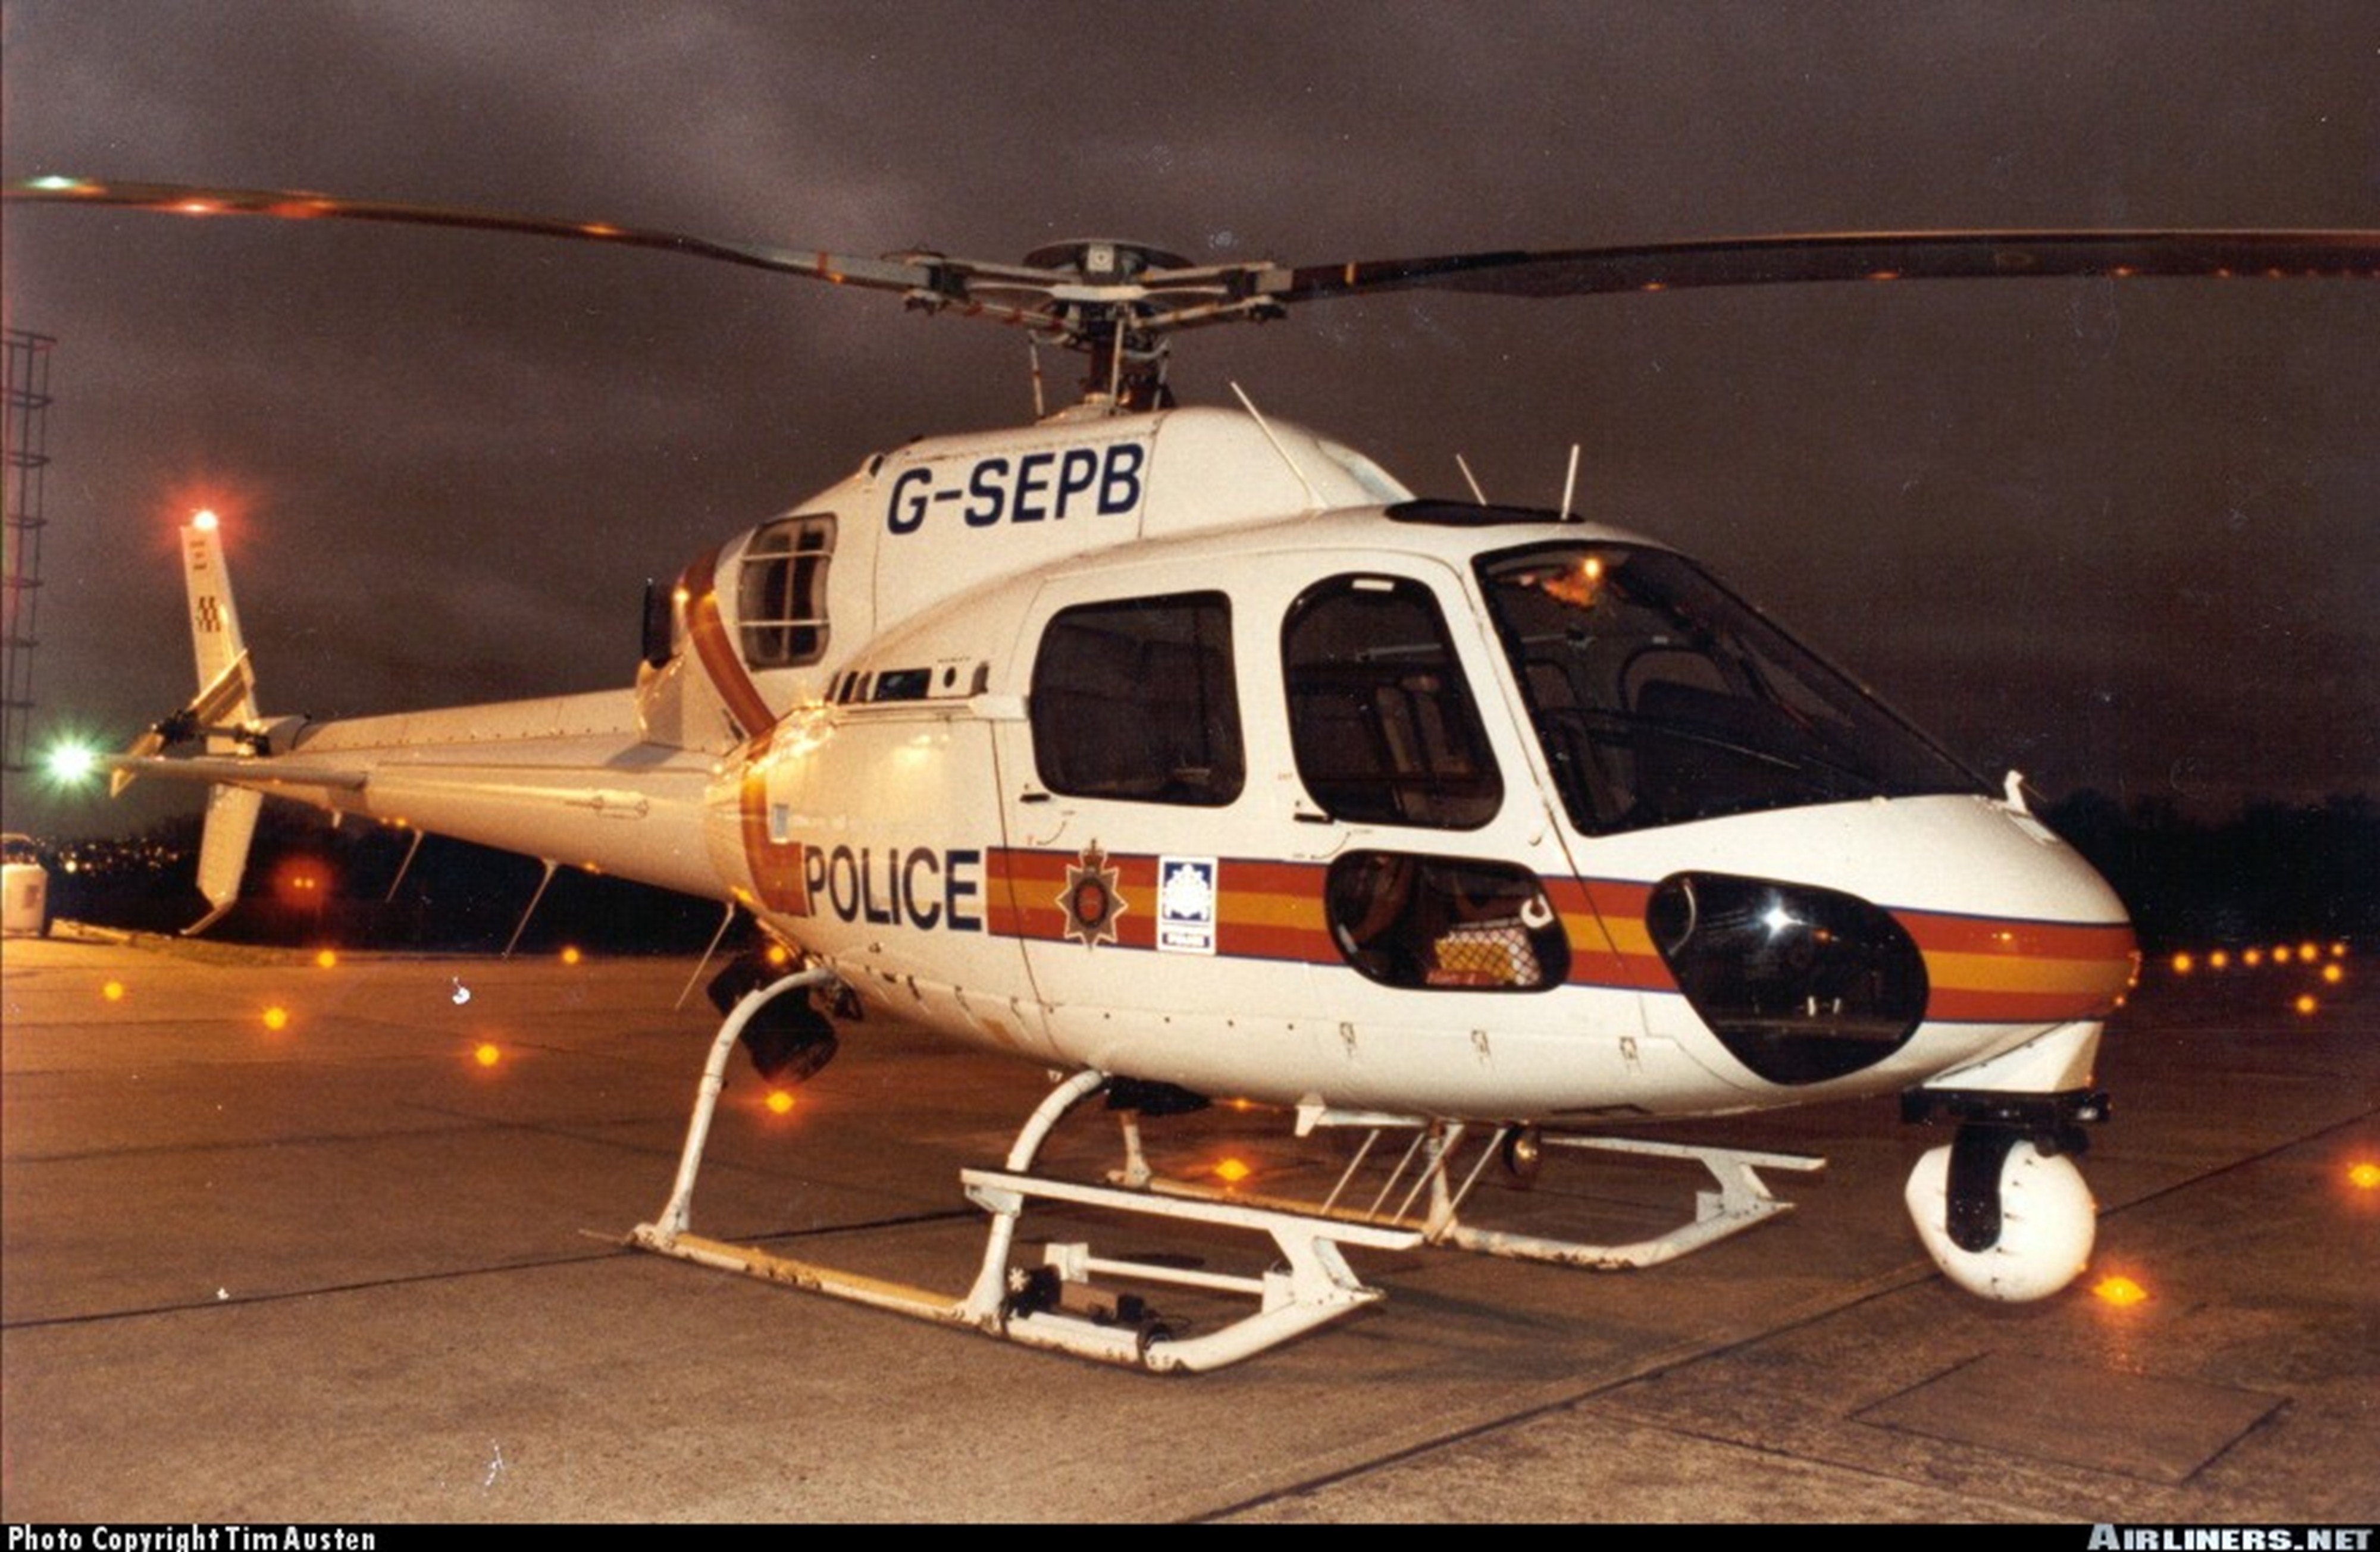 helicopter, Aircraft, Police, Spain, Eurocopter Wallpaper